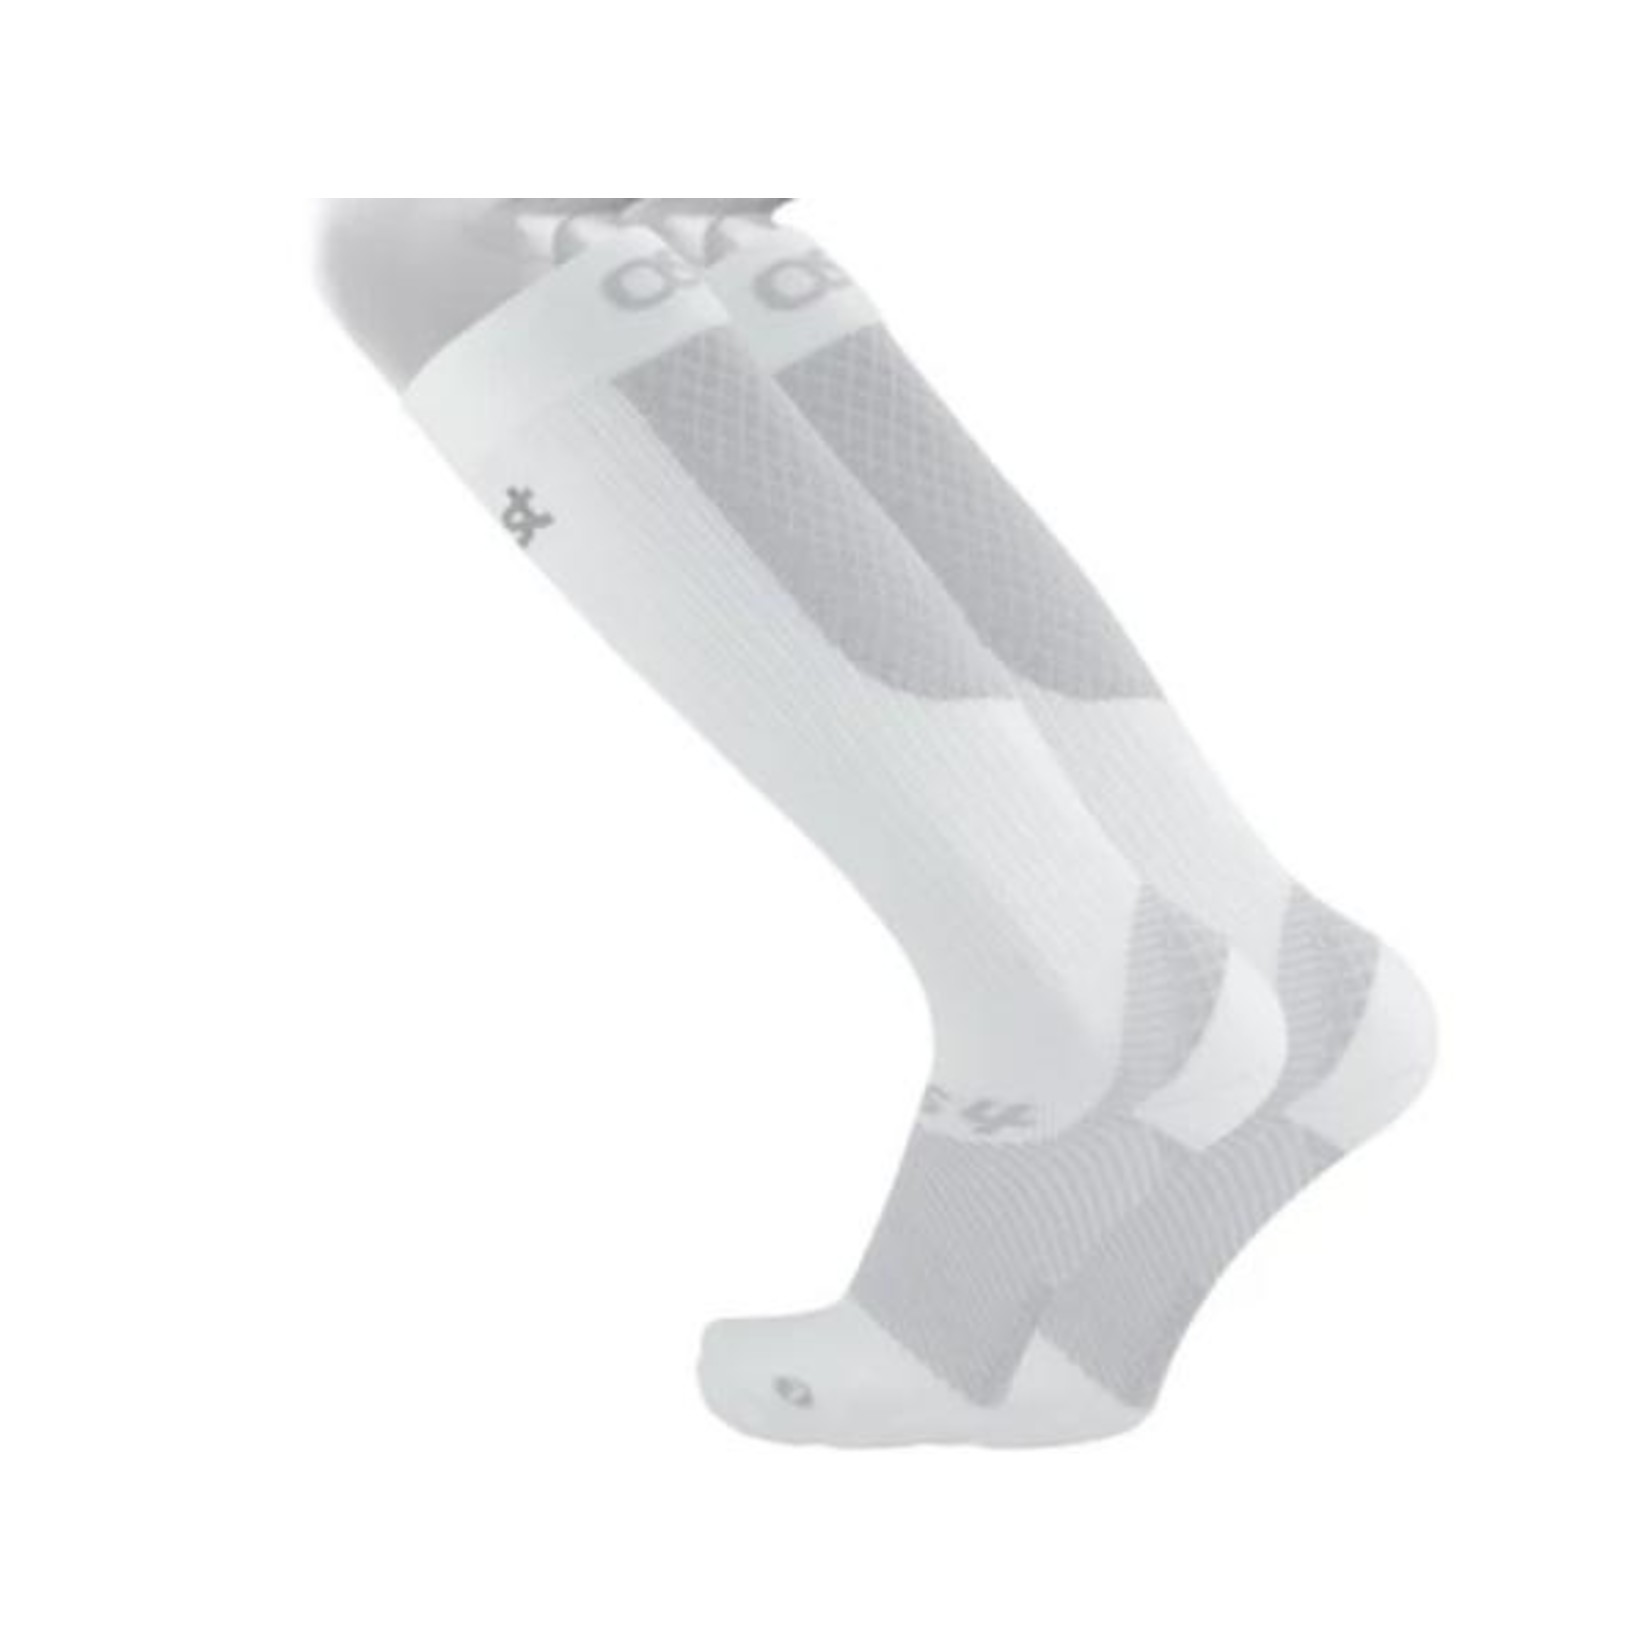 OS1st OS1st FS4+ Over The Calf Compression Bracing Sock